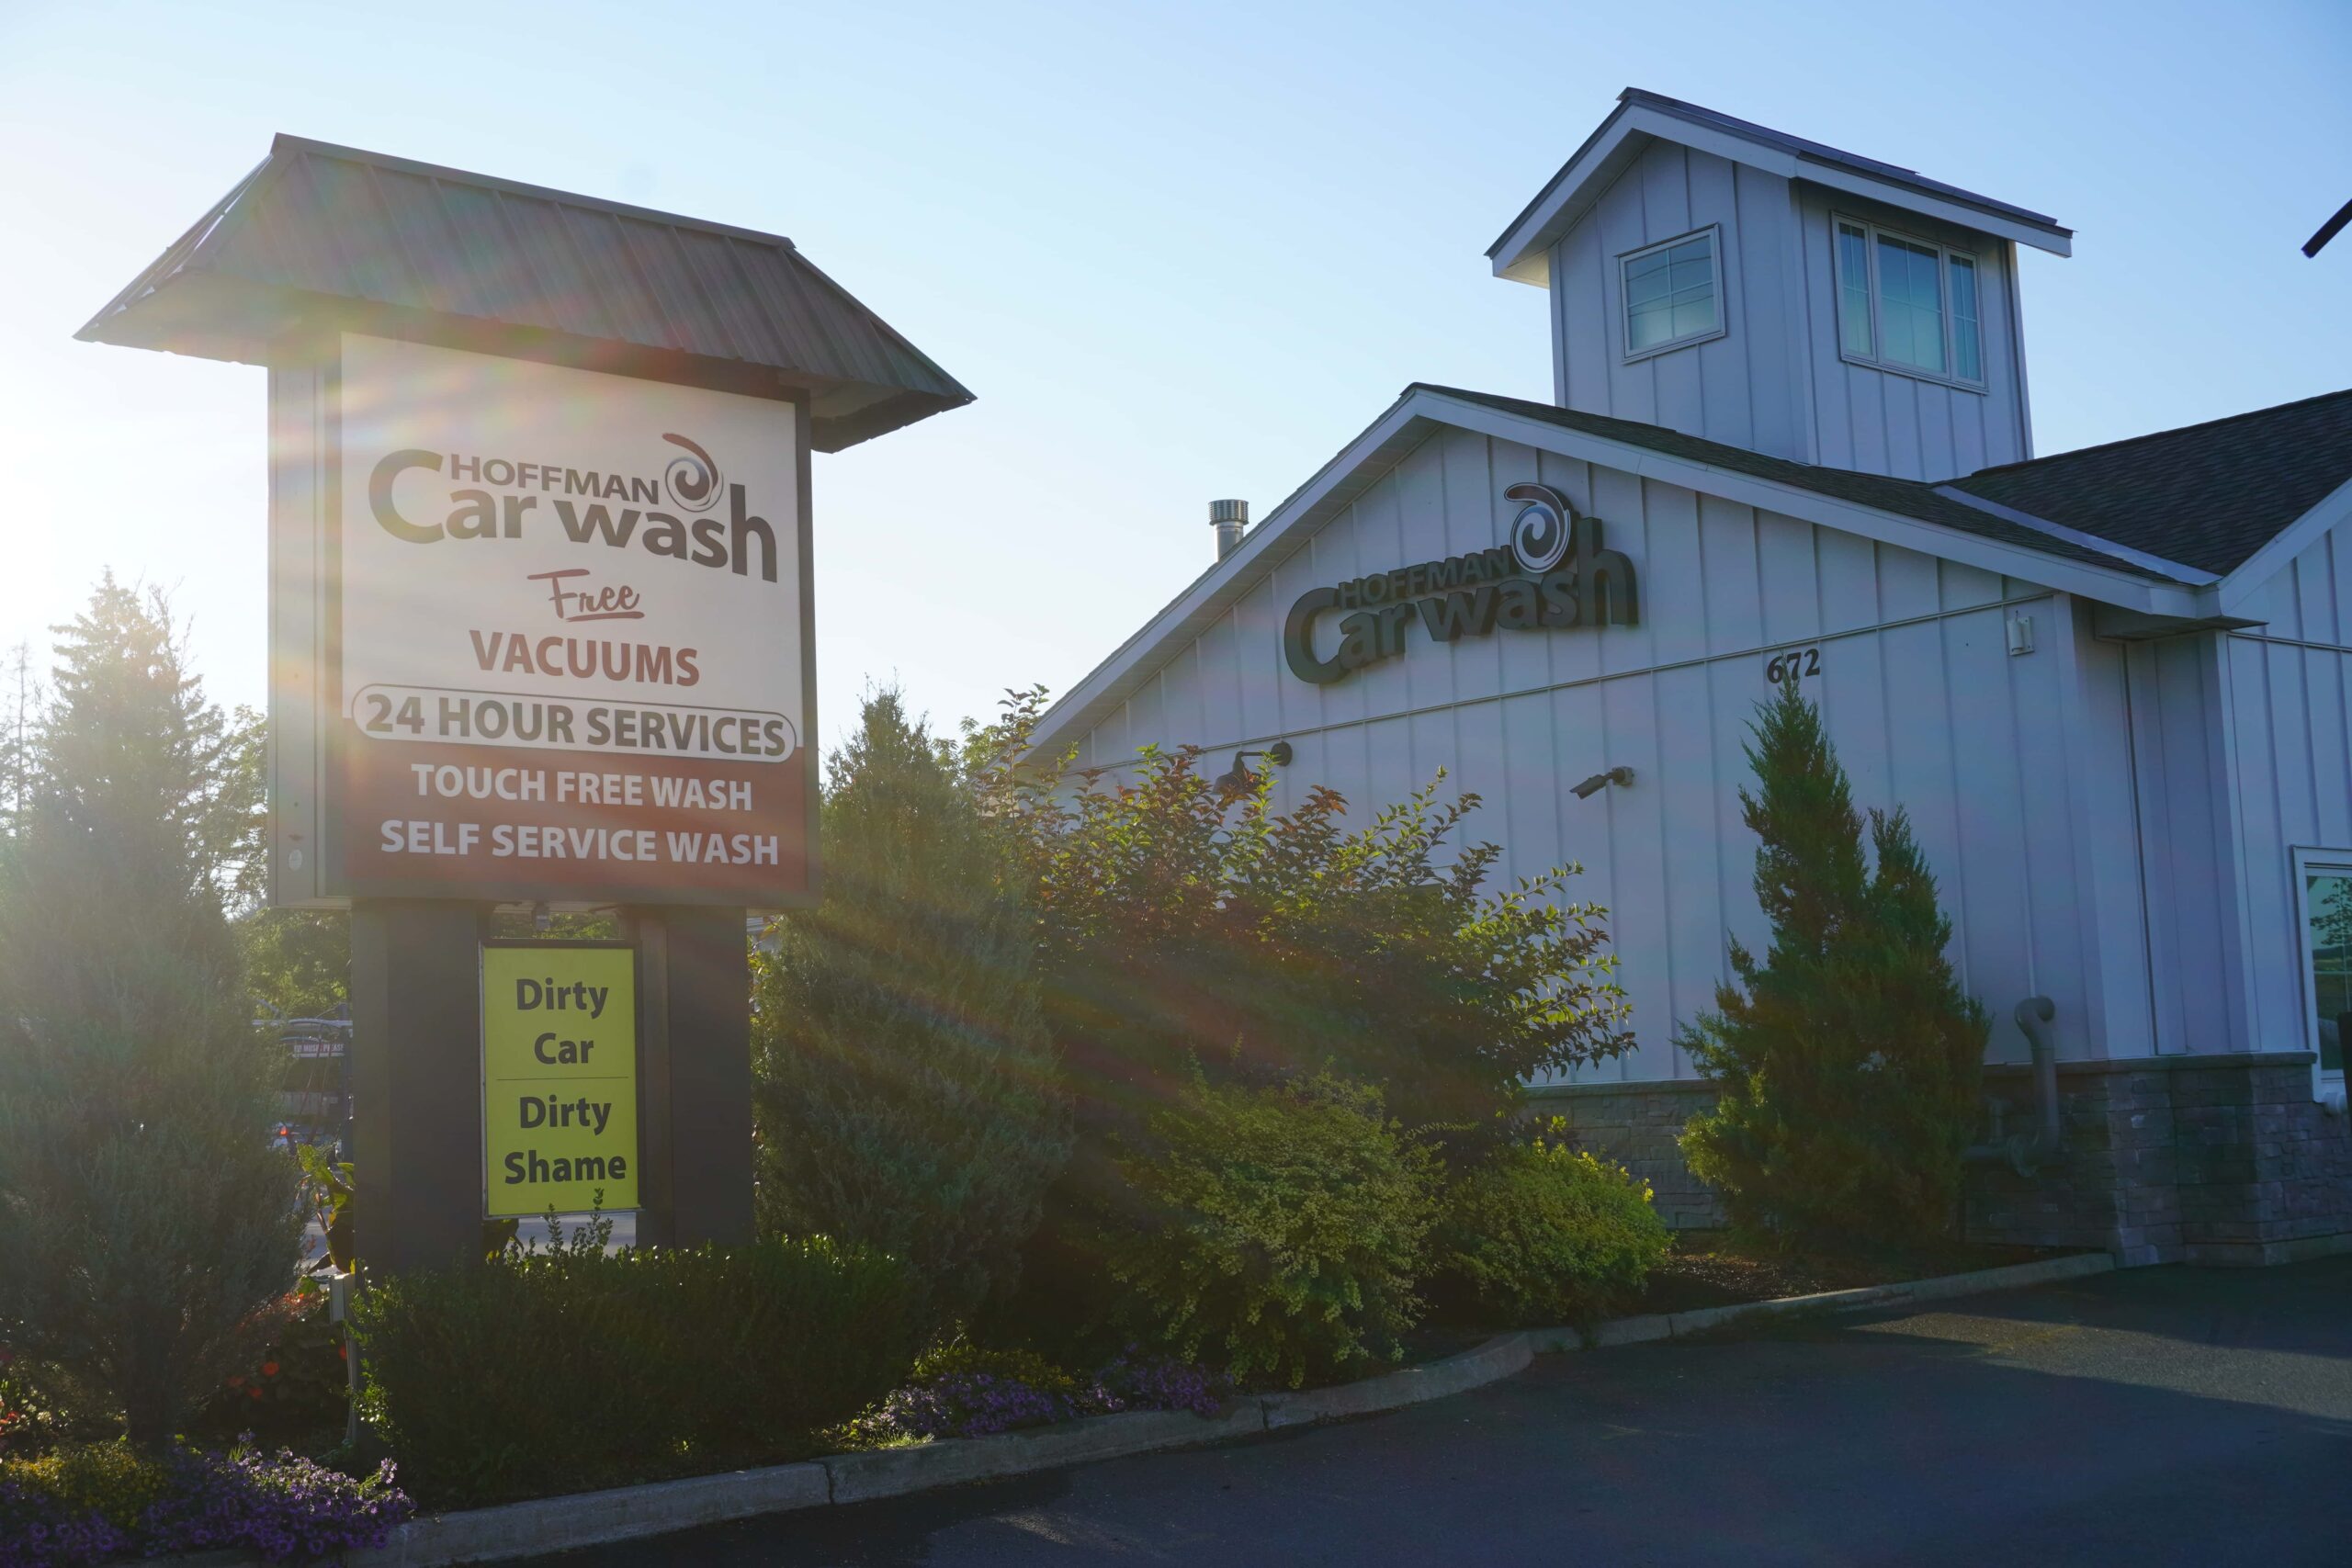 Photo of the the Hoffman Car Wash location at 672 Hoosick Rd., Troy, NY